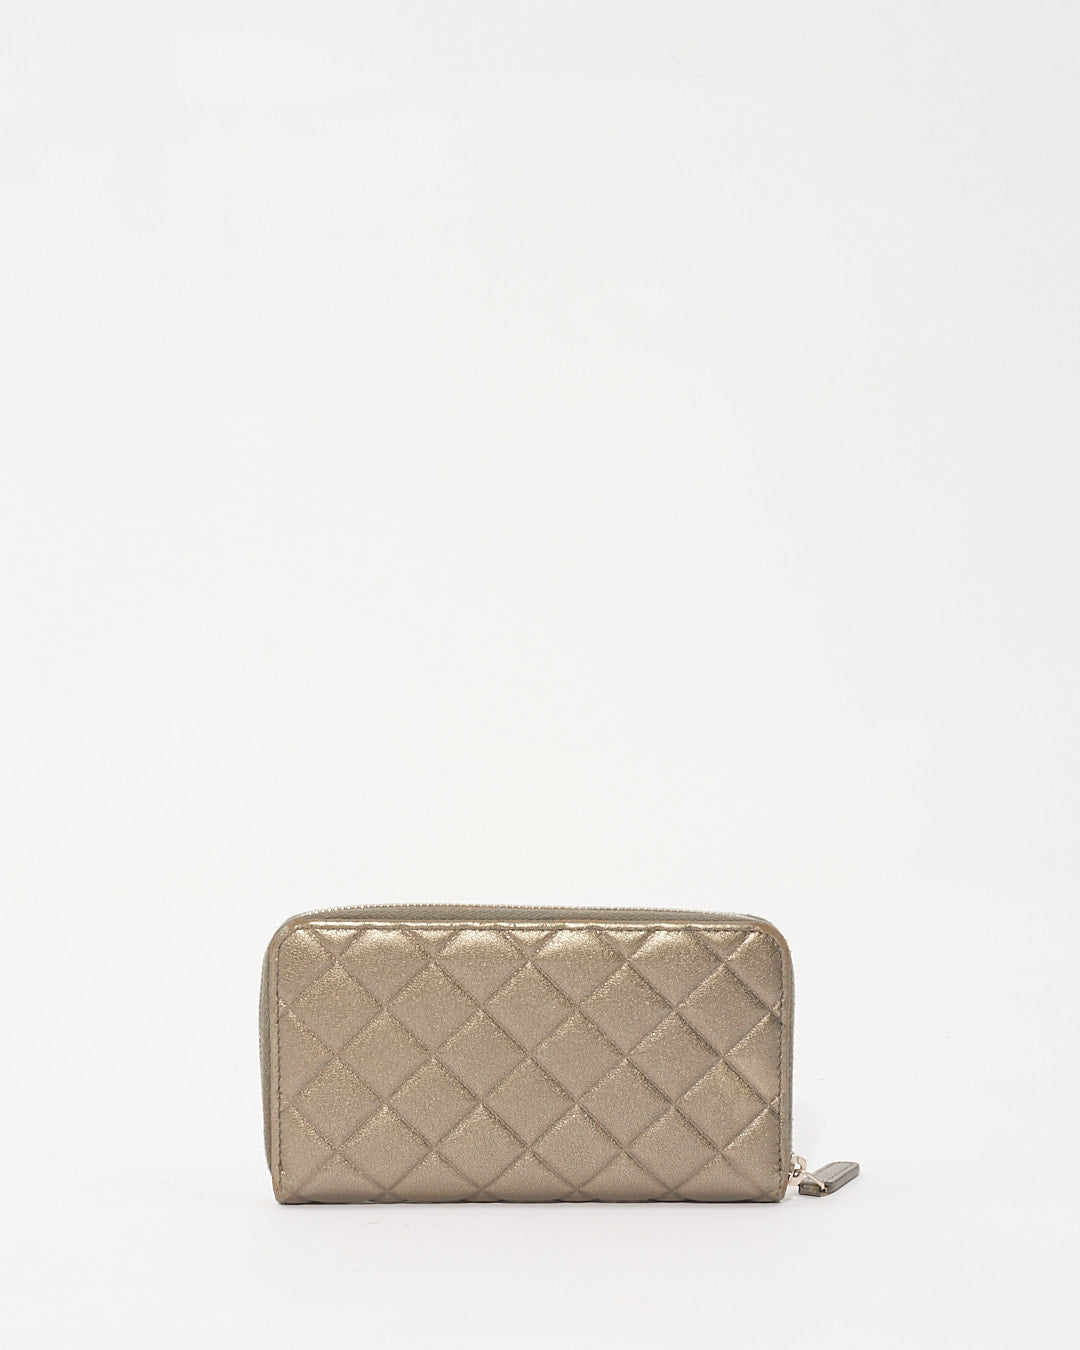 Chanel Silver Quilted Leather CC Zip Around Wallet